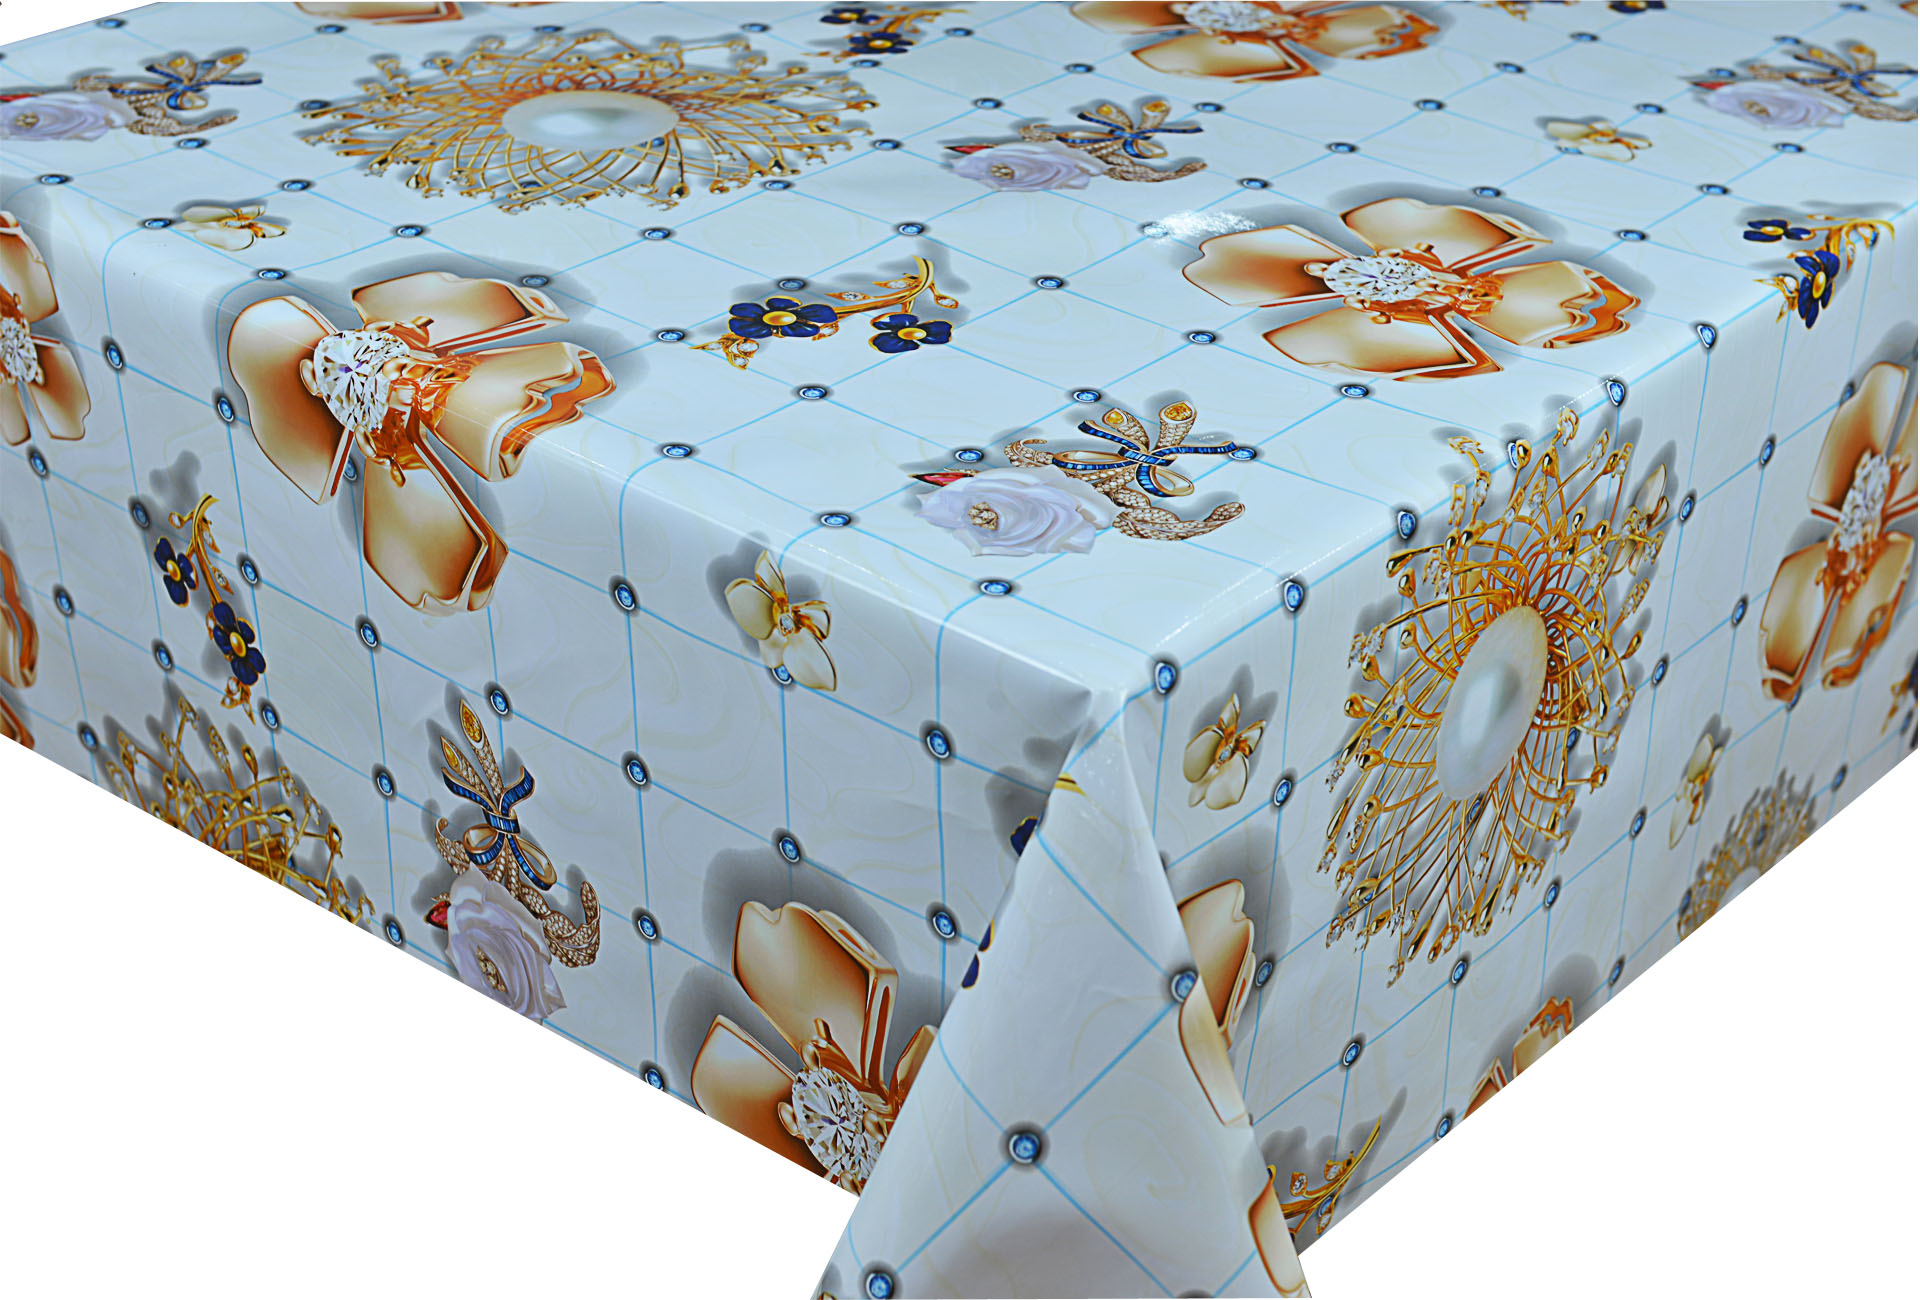 Table Cover - Printed Table Cover - Europe Design Table Cover - BS-N8147